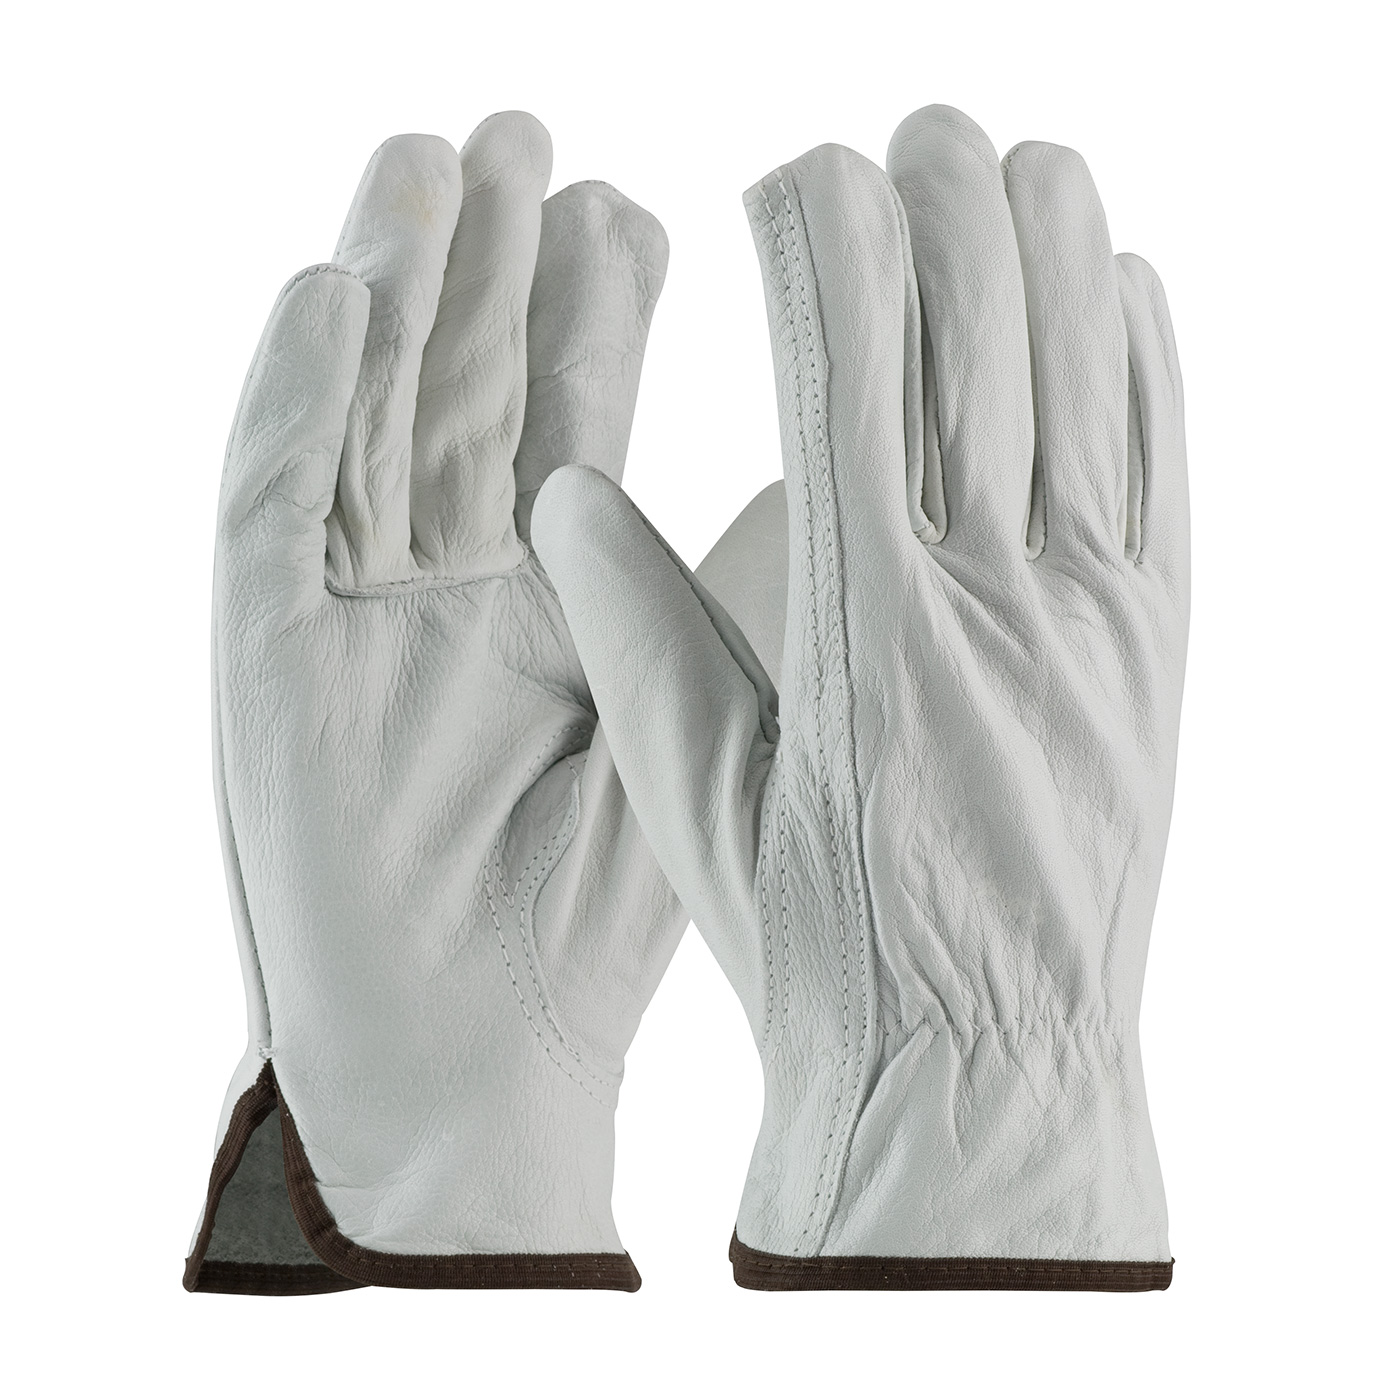 PIP 68-162/S Economy Grade Top Grain Cowhide Leather Drivers Glove - Keystone Thumb - Small PID-68 162 S